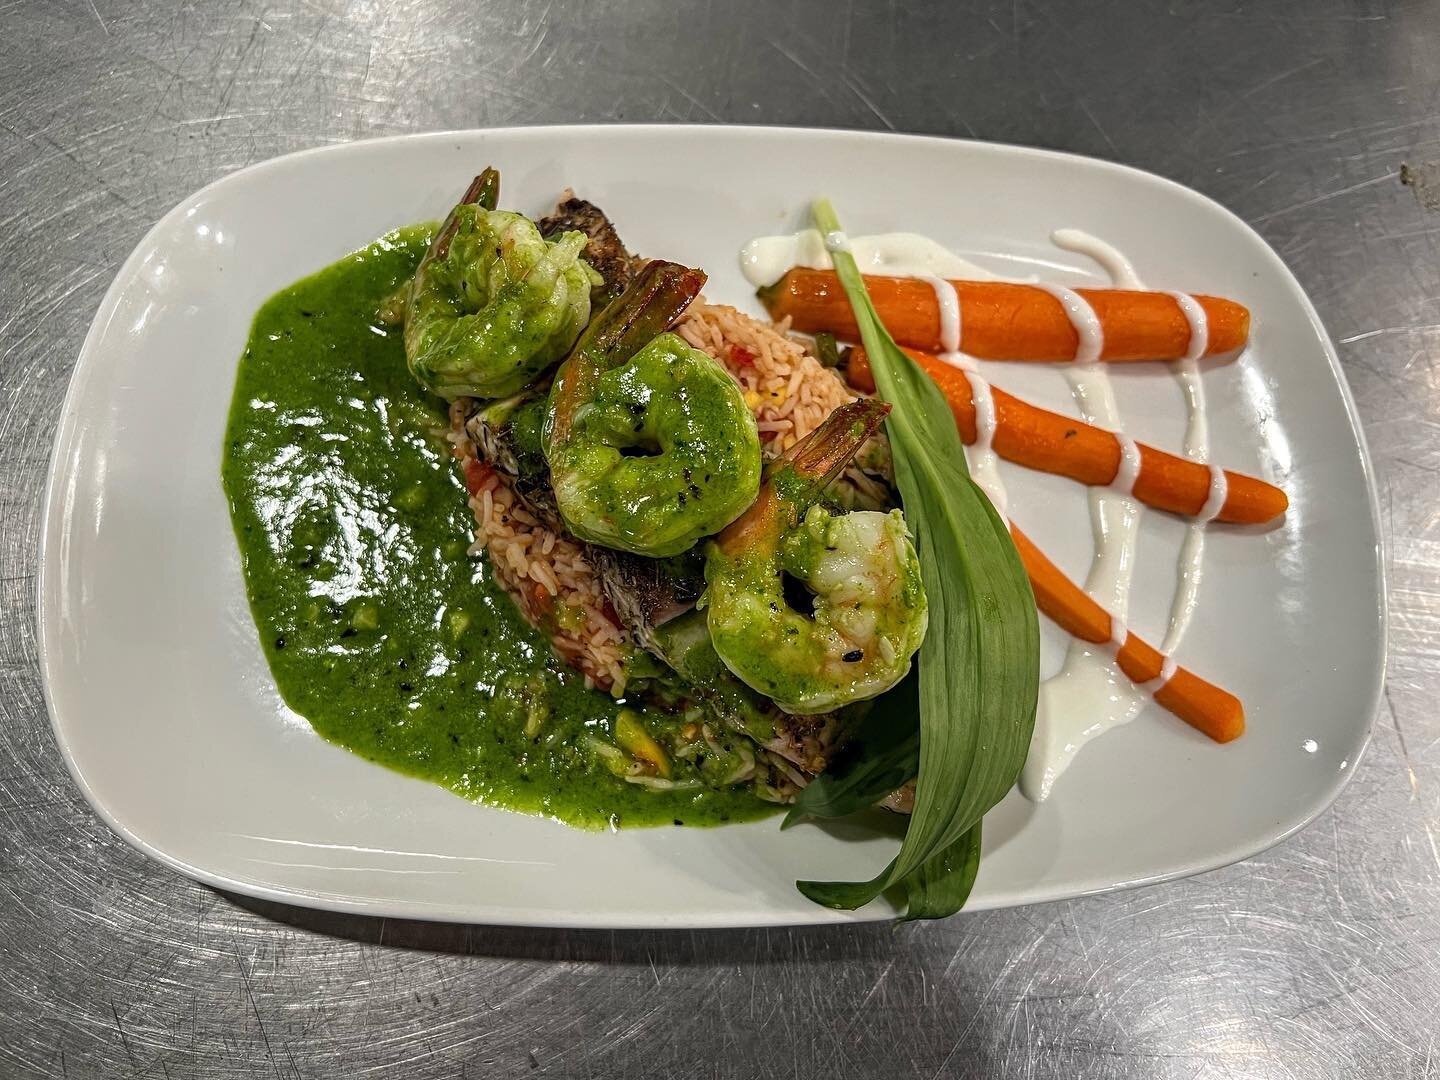 Happy Good Friday!! 

Our special for this evening is beautiful piece of Mahi Mahi over spring rice with a green garlic sauce, accompanied by saut&eacute;ed shrimp and baby carrots. 

#food #dinner #special #fish #goodfriday #scarborough #jerseyshore